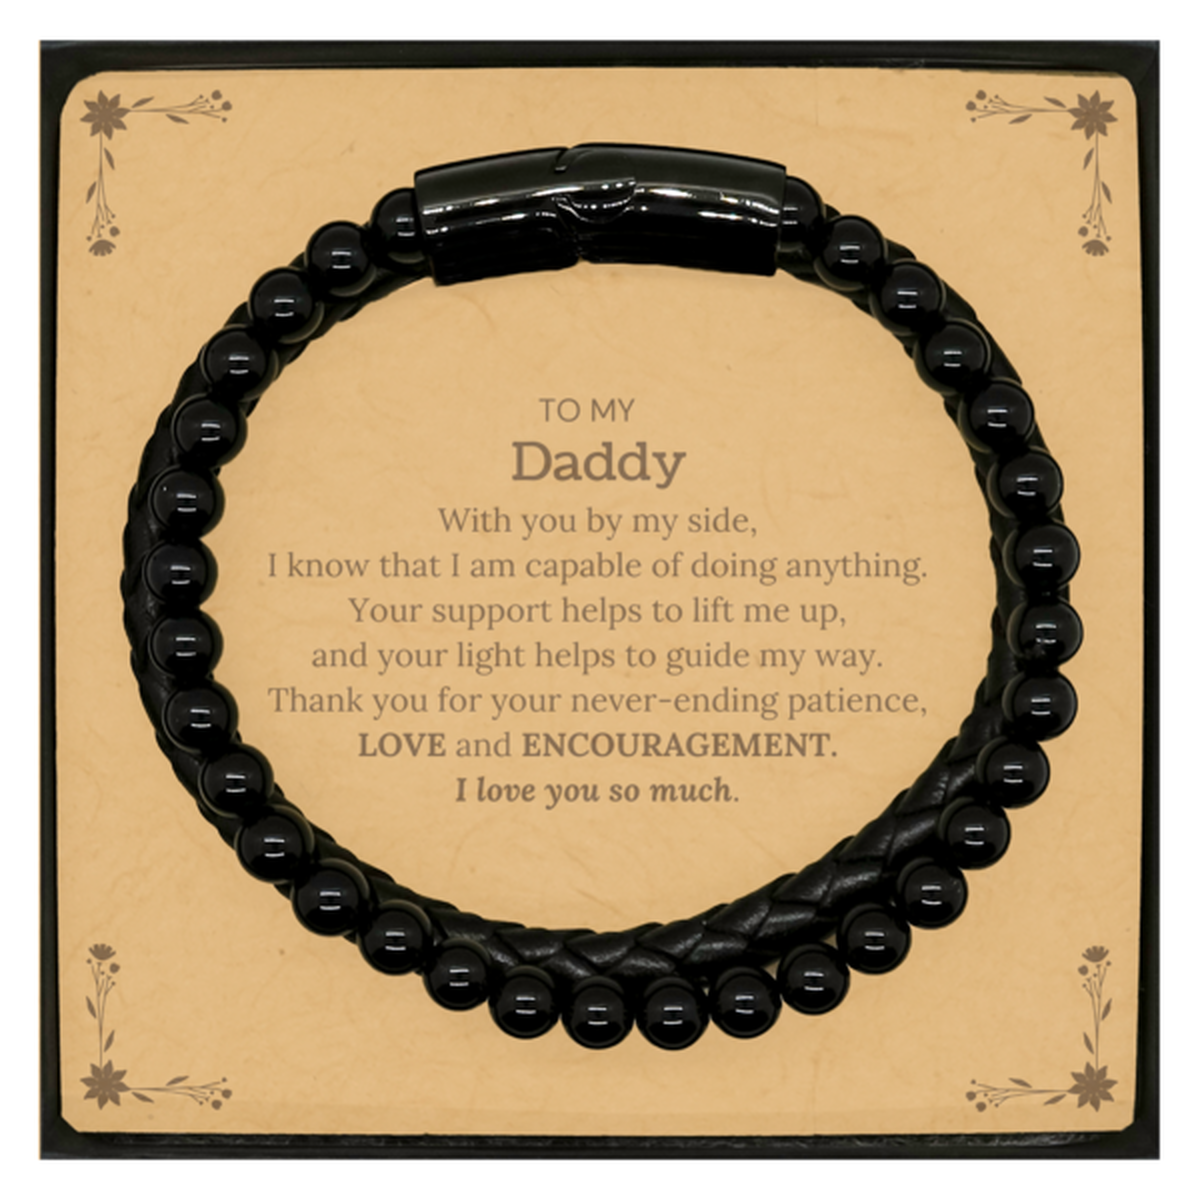 Appreciation Daddy Stone Leather Bracelets Gifts, To My Daddy Birthday Christmas Wedding Keepsake Gifts for Daddy With you by my side, I know that I am capable of doing anything. I love you so much